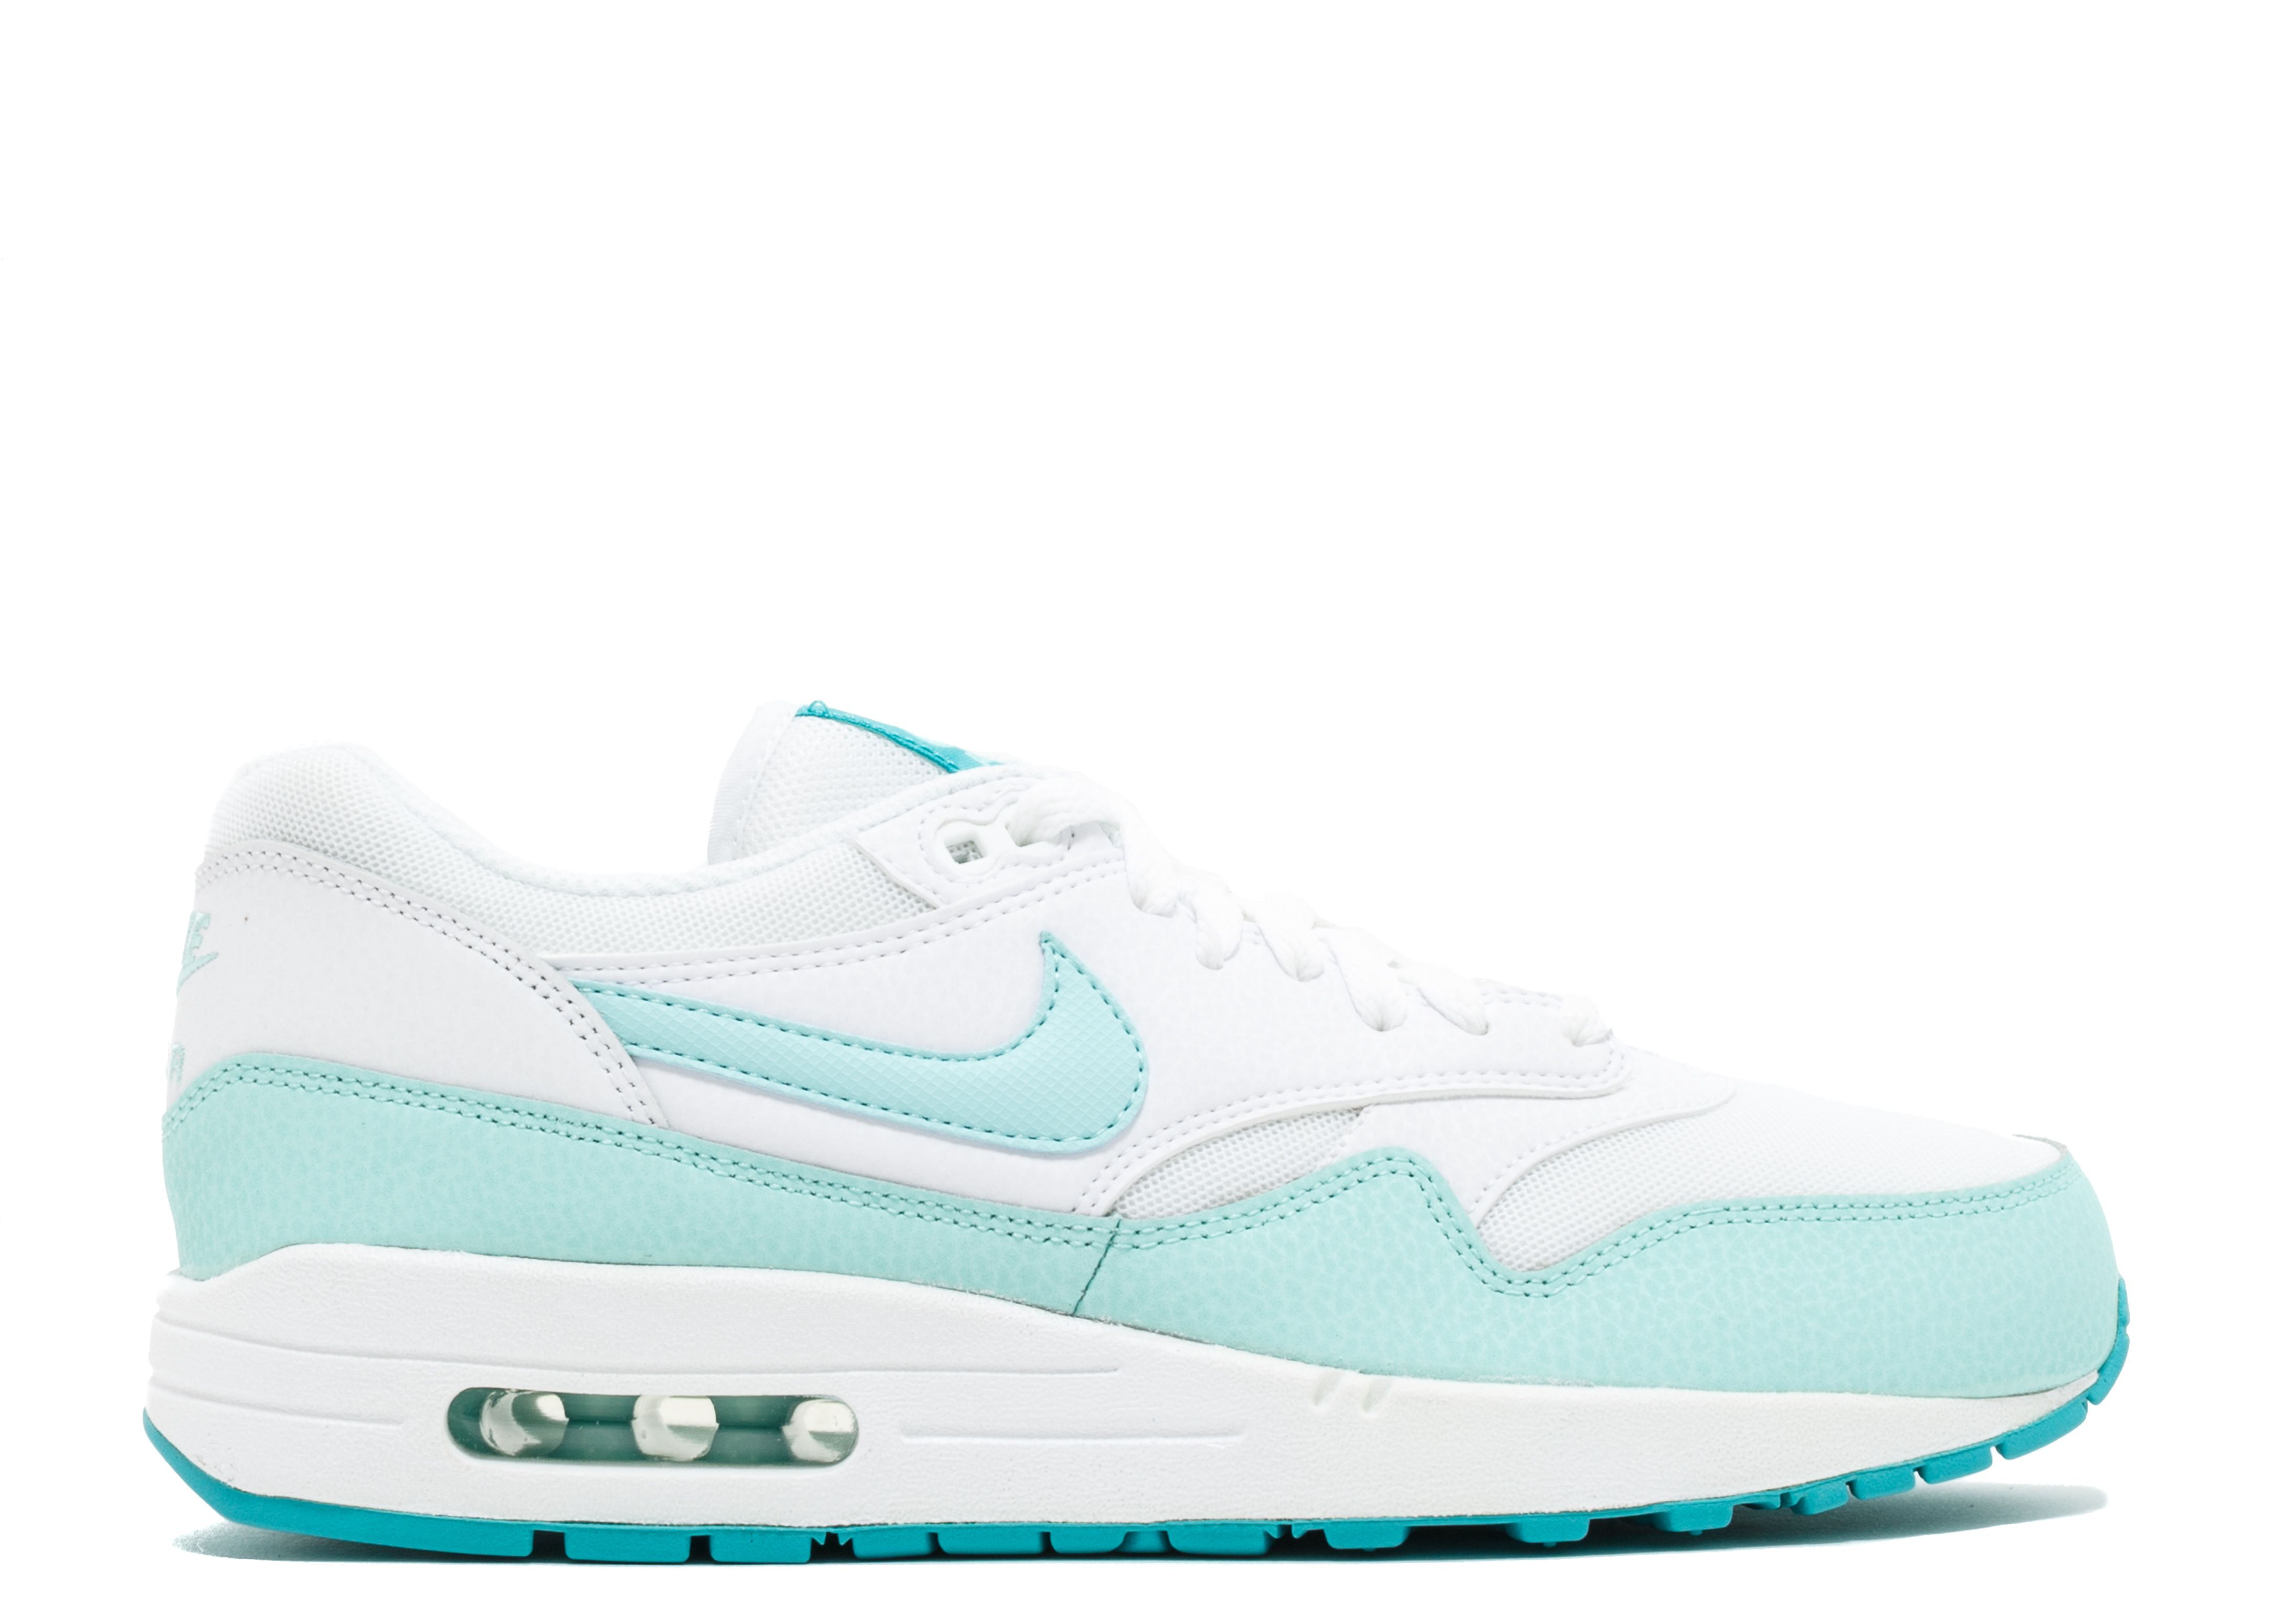 Nike Air Max 1 Artisan Teal - Another Dope Exclusive For The Ladies •